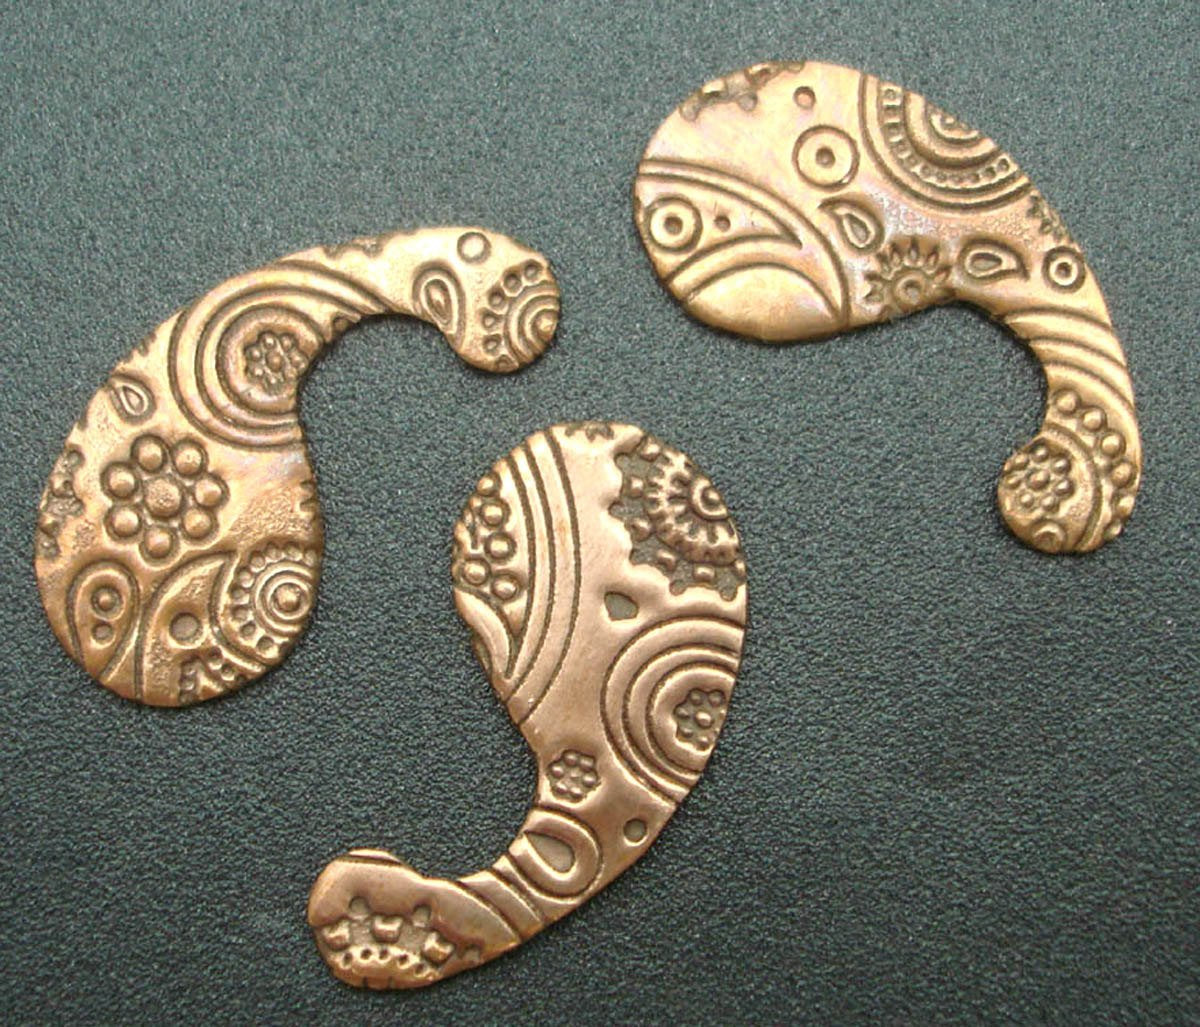 Paisley with Paisley Pattern 28mm x 15mm 20g for Blanks Enameling Stamping Texturing Soldering Variety of Metals - 6 pieces